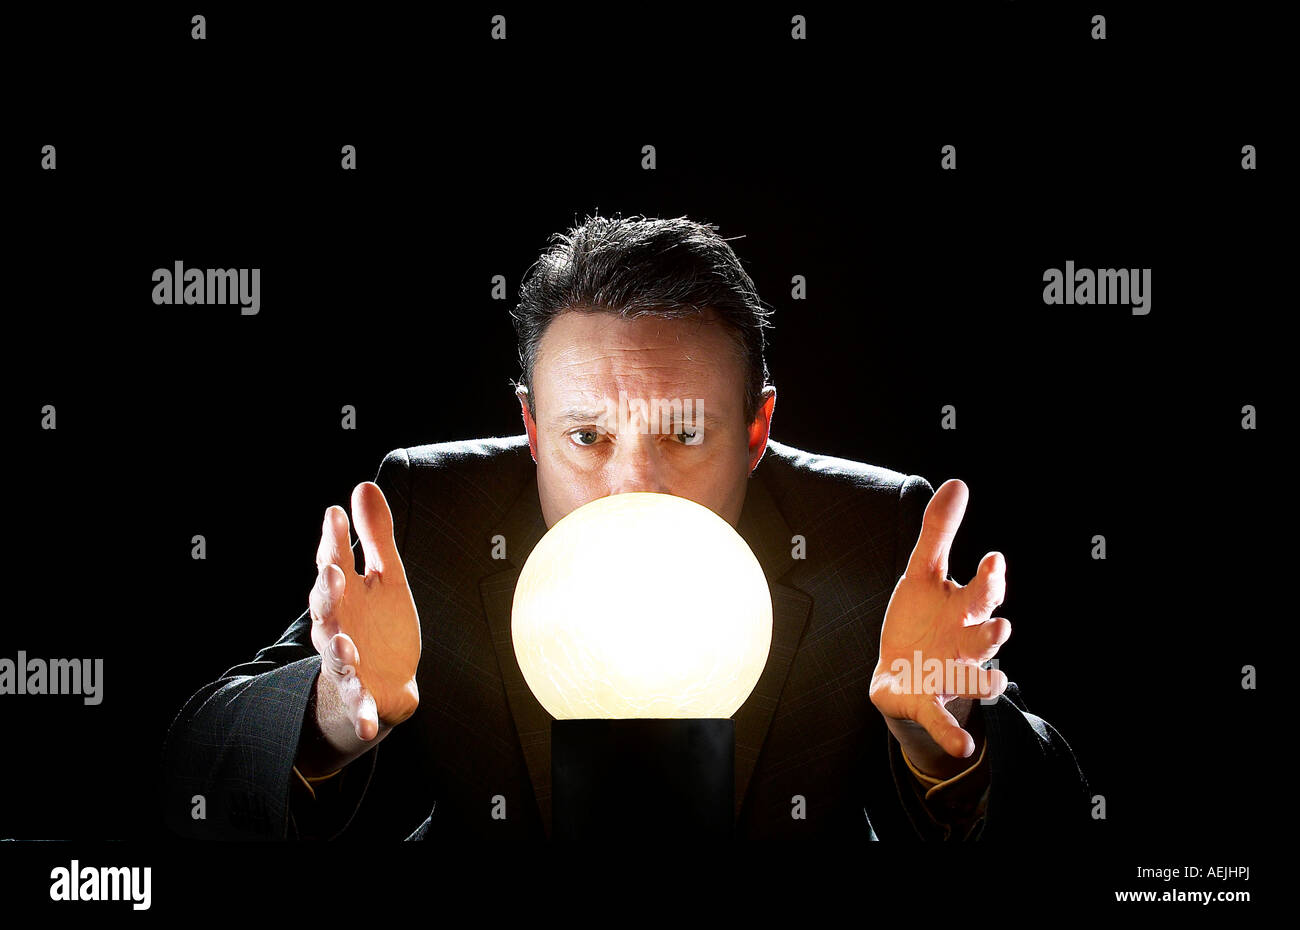 A BUSINESS MAN AGAINST A BLACK BACKGROUND LOOKING INTENSELY INTO AN INTERNALLY LIT CRYSTAL BALL Stock Photo